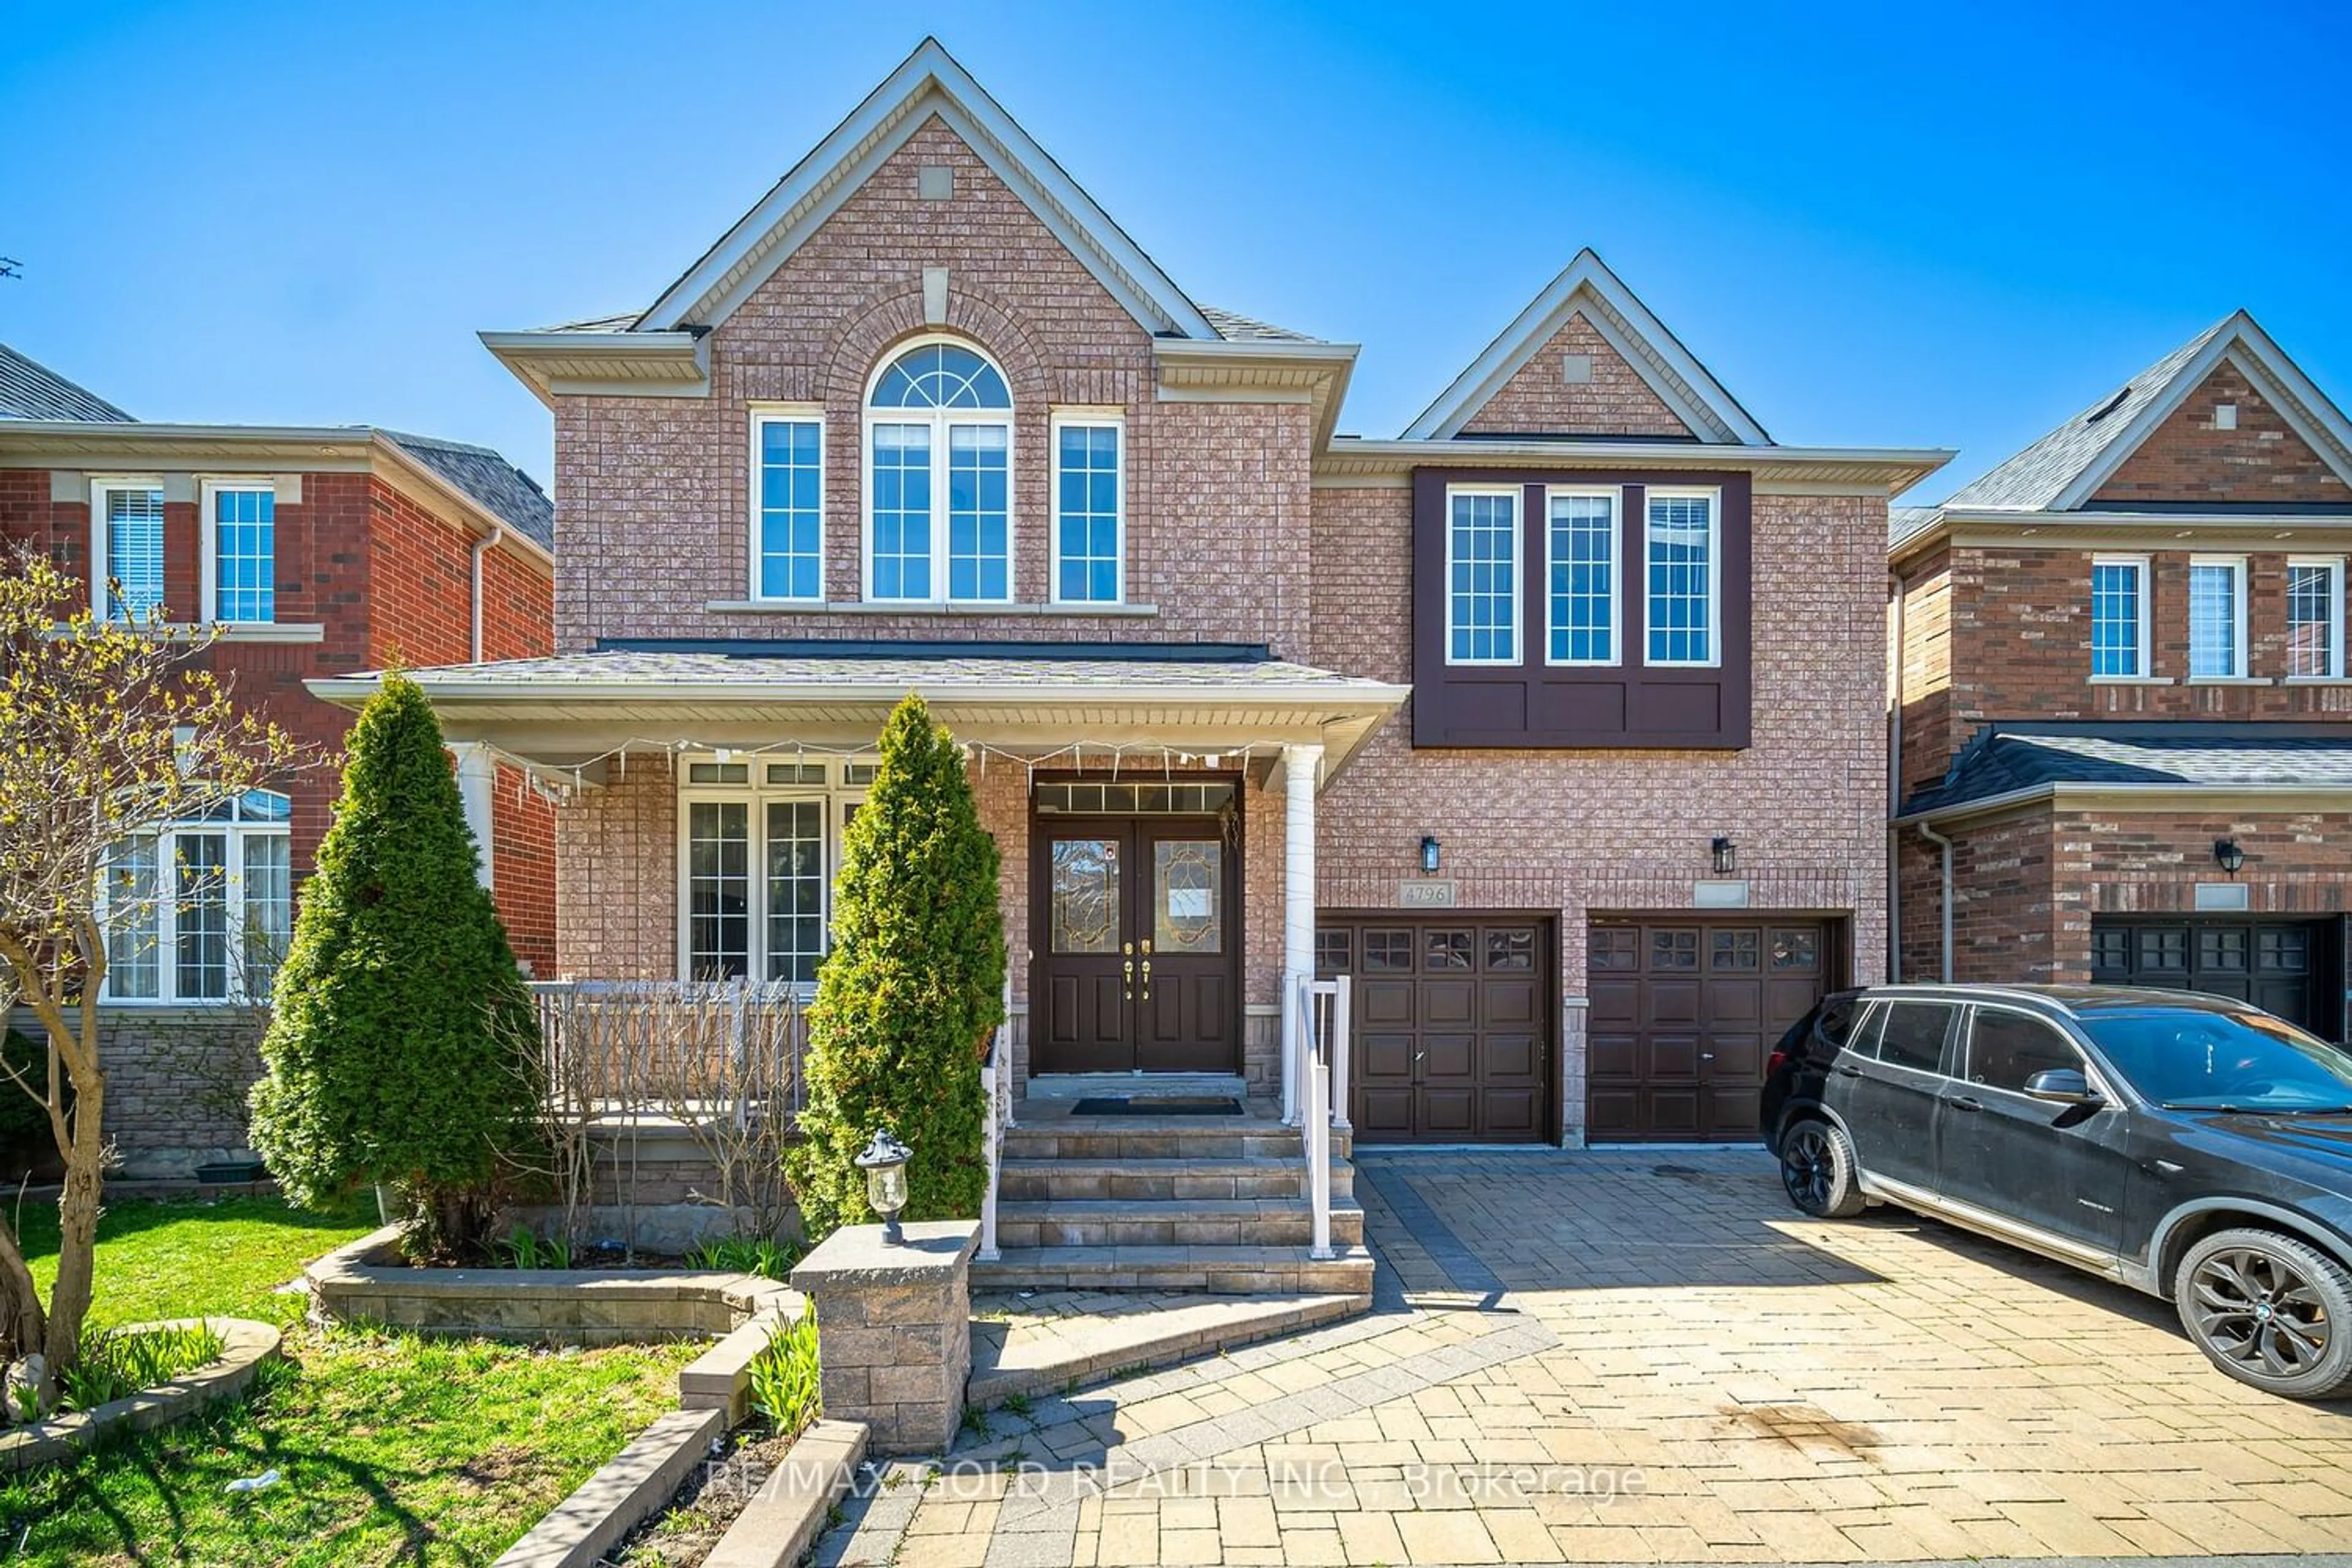 Home with brick exterior material for 4796 Fulwell Rd, Mississauga Ontario L5M 7J7